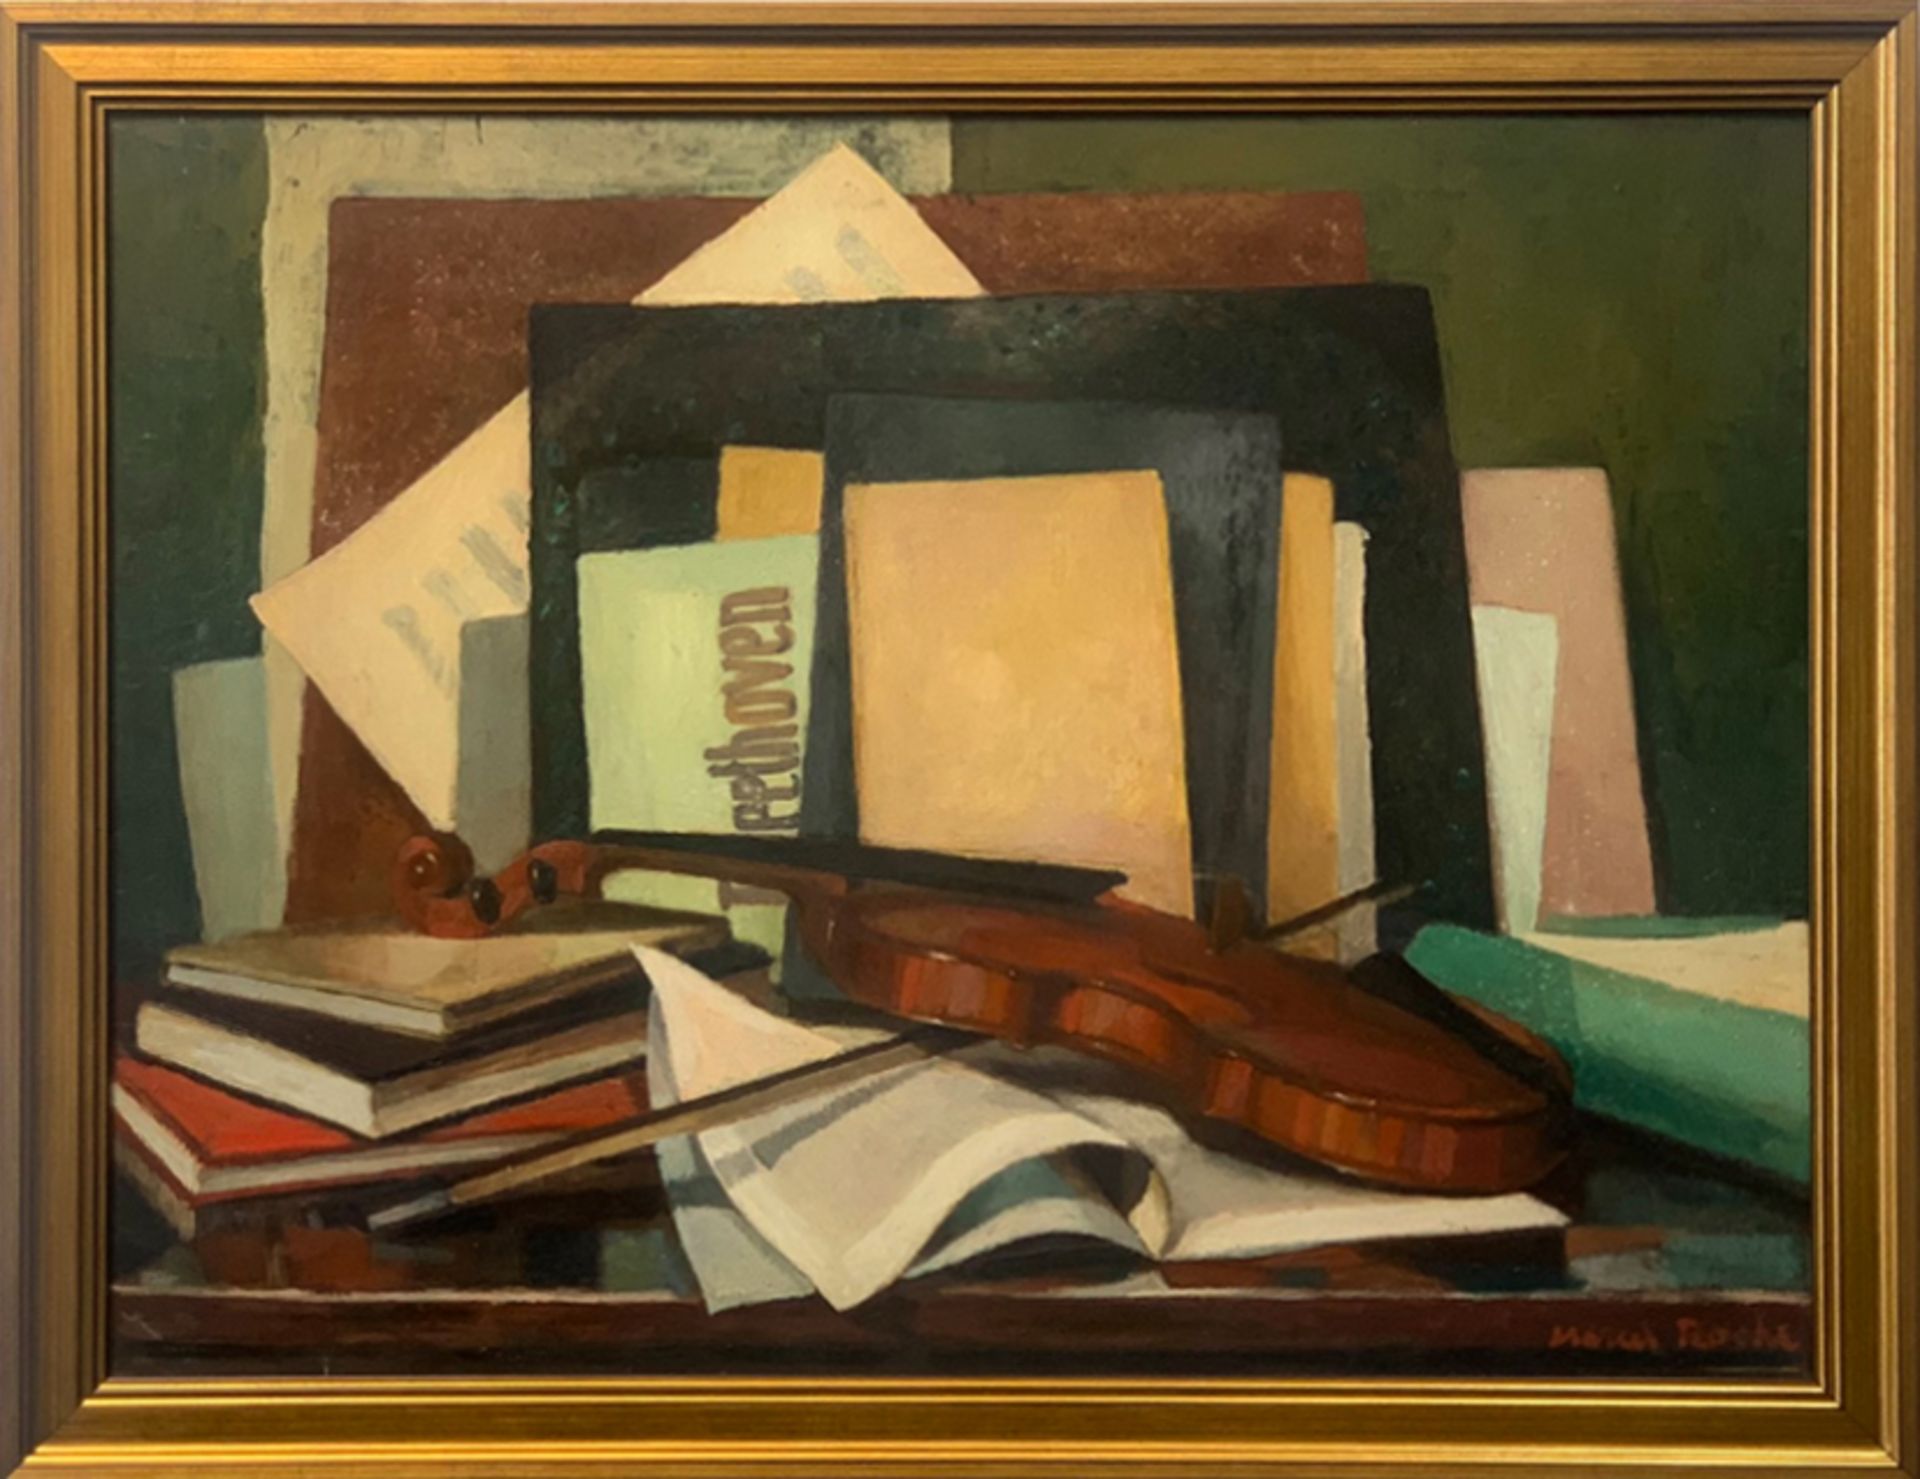 Roche Marcel (1890-1959), Oil Painting on Wood